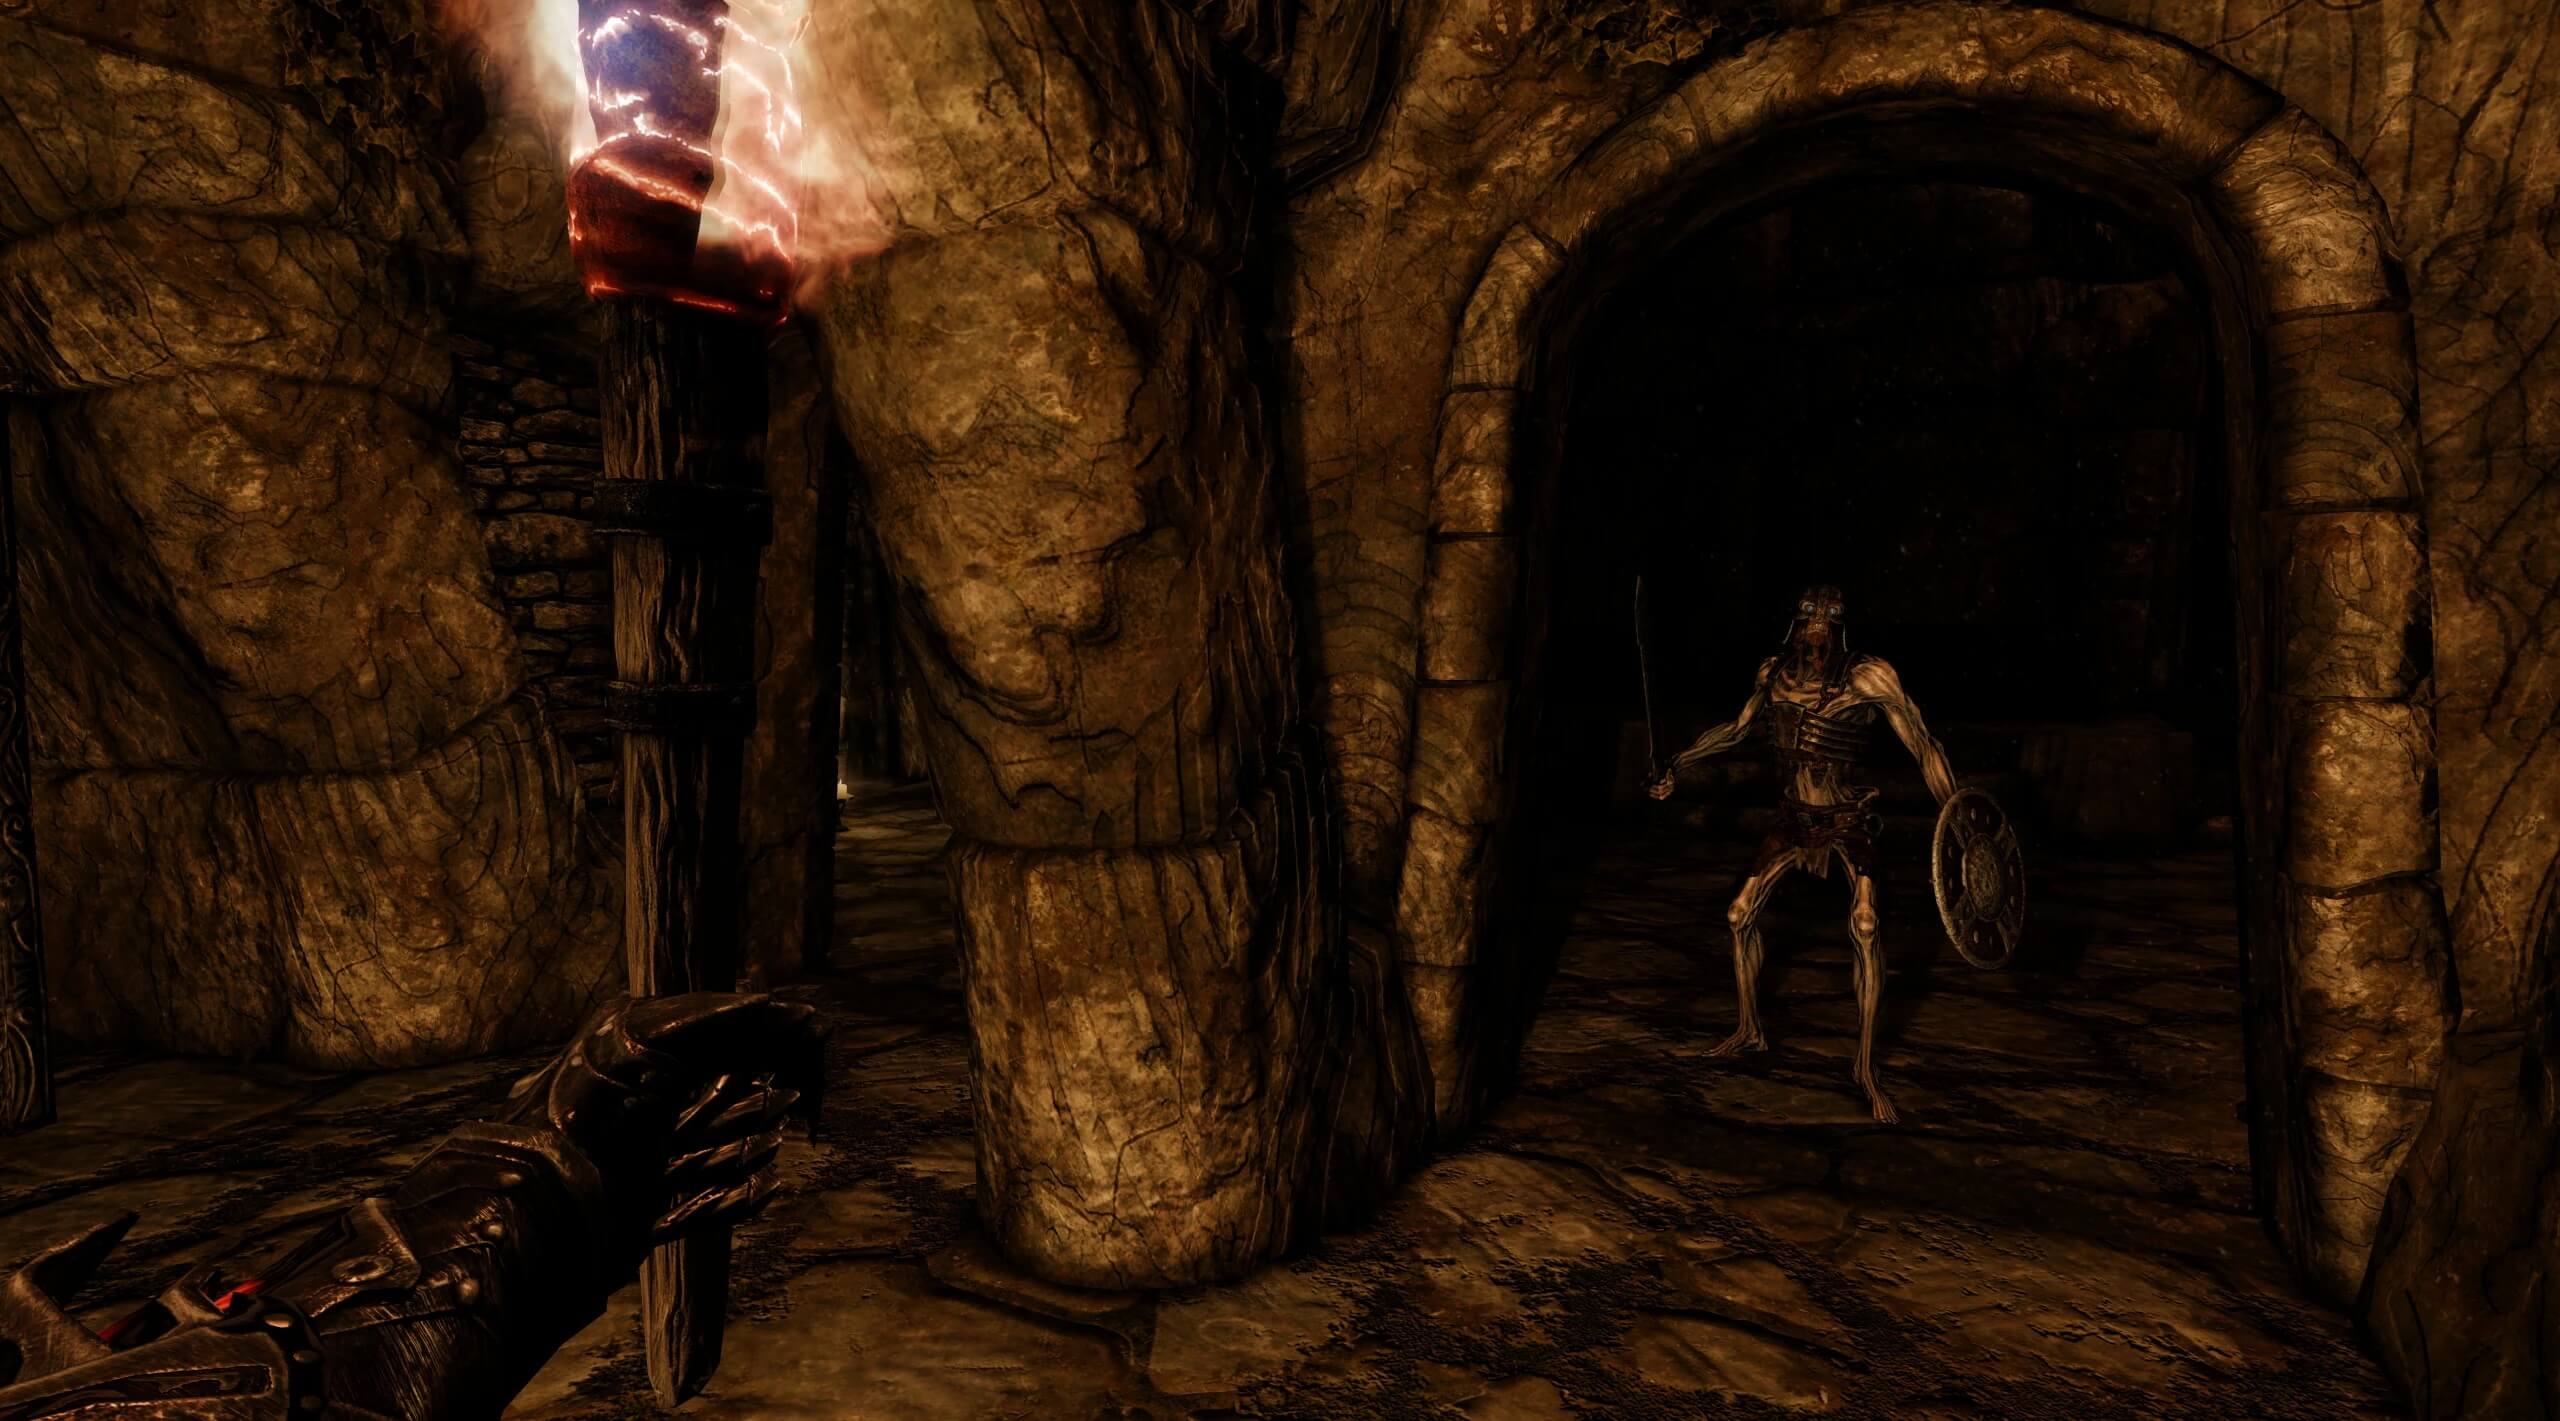 This Skyrim Mod Adds a Mordor-Inspired Nemesis System To The Game